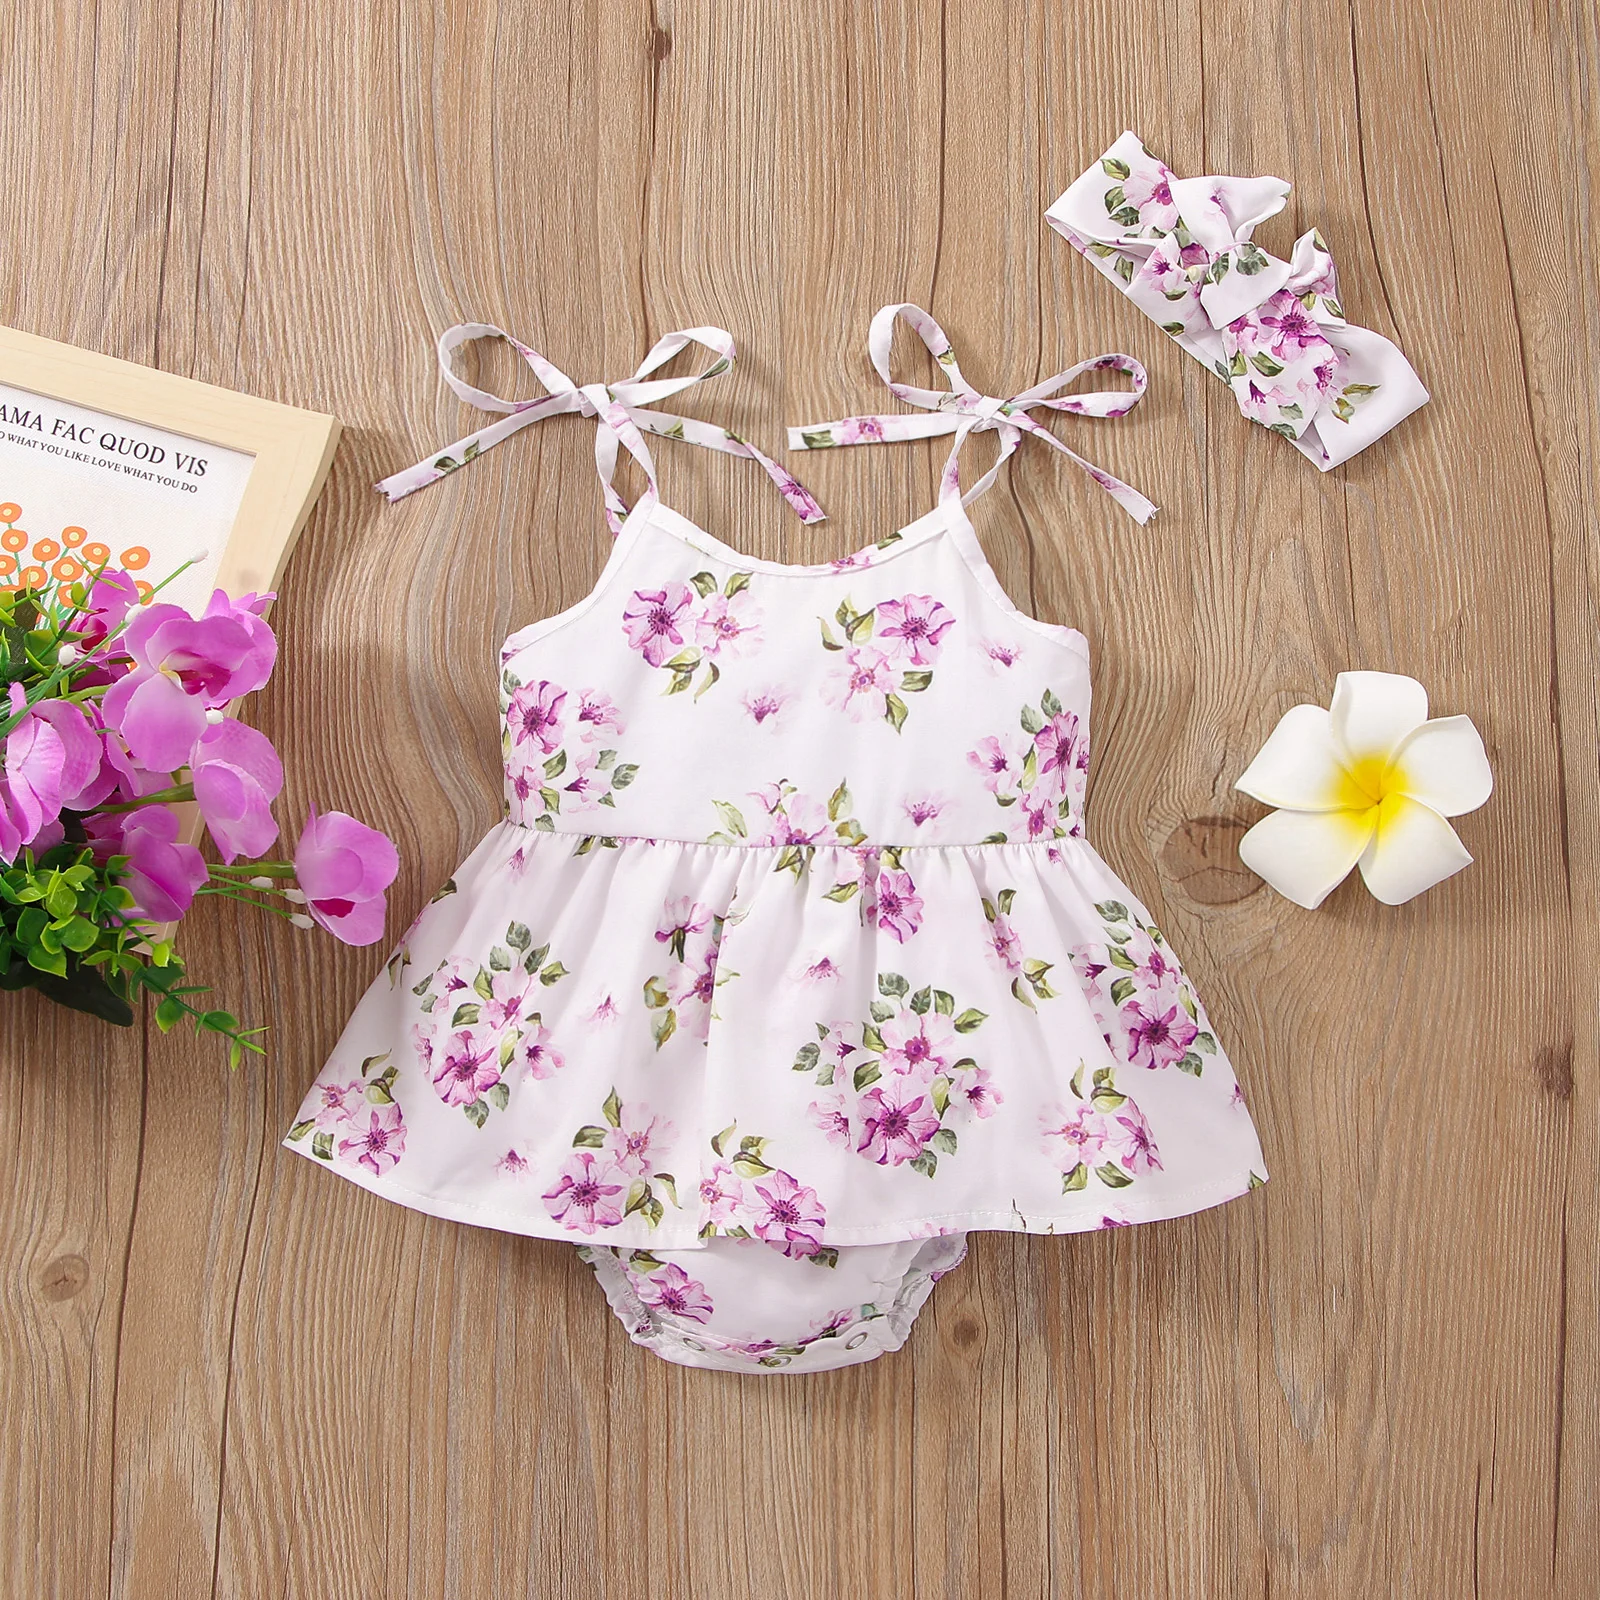 Baby Bodysuits expensive Infant Baby Girls Romper Dress Sweet Floral Sleeveless Bandage Spaghetti Shoulder Strap Jumpsuits with Headband cheap baby bodysuits	